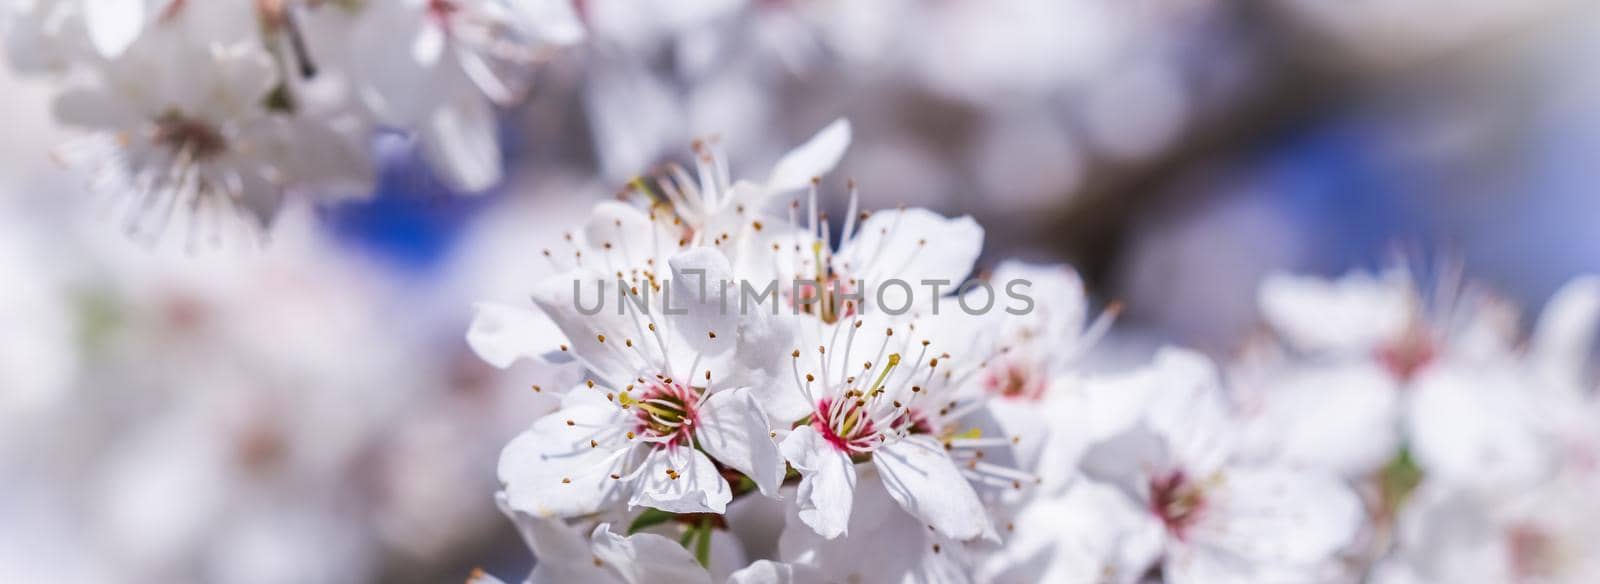 Cherry blossoms in spring. Beautiful white flowers against blue sky